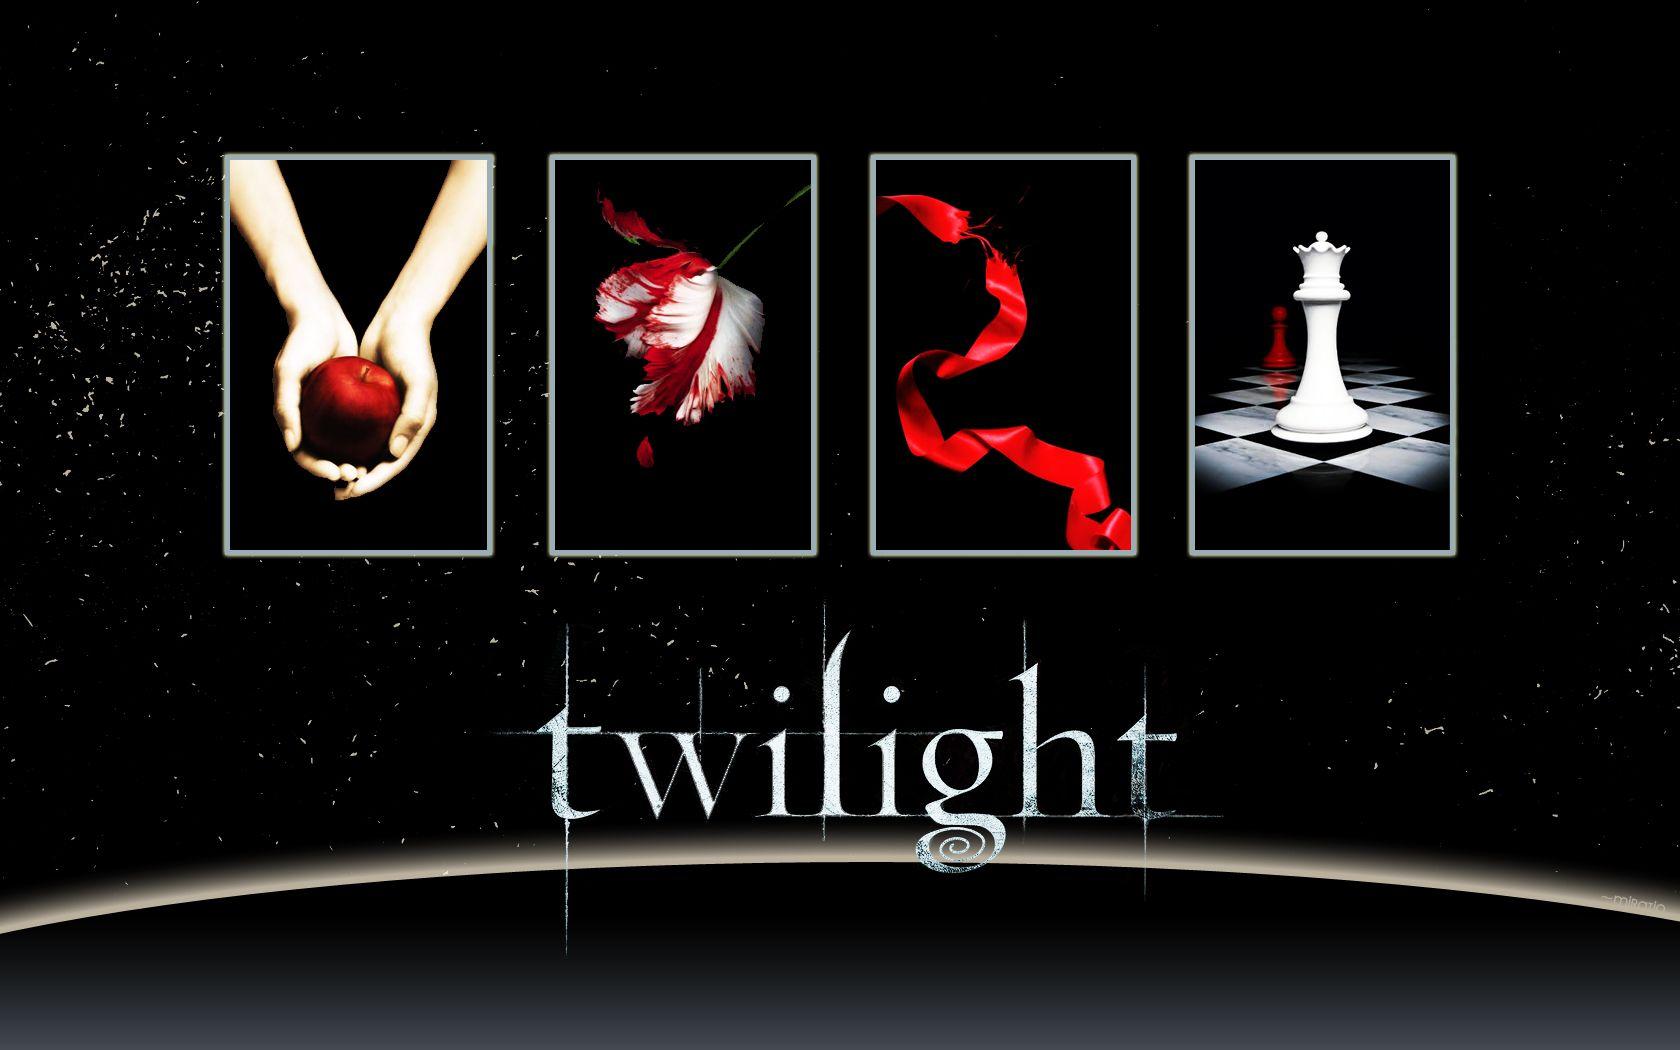 Twilight-Saga Logo - 10 Lesser-Known Facts about the Twilight Books